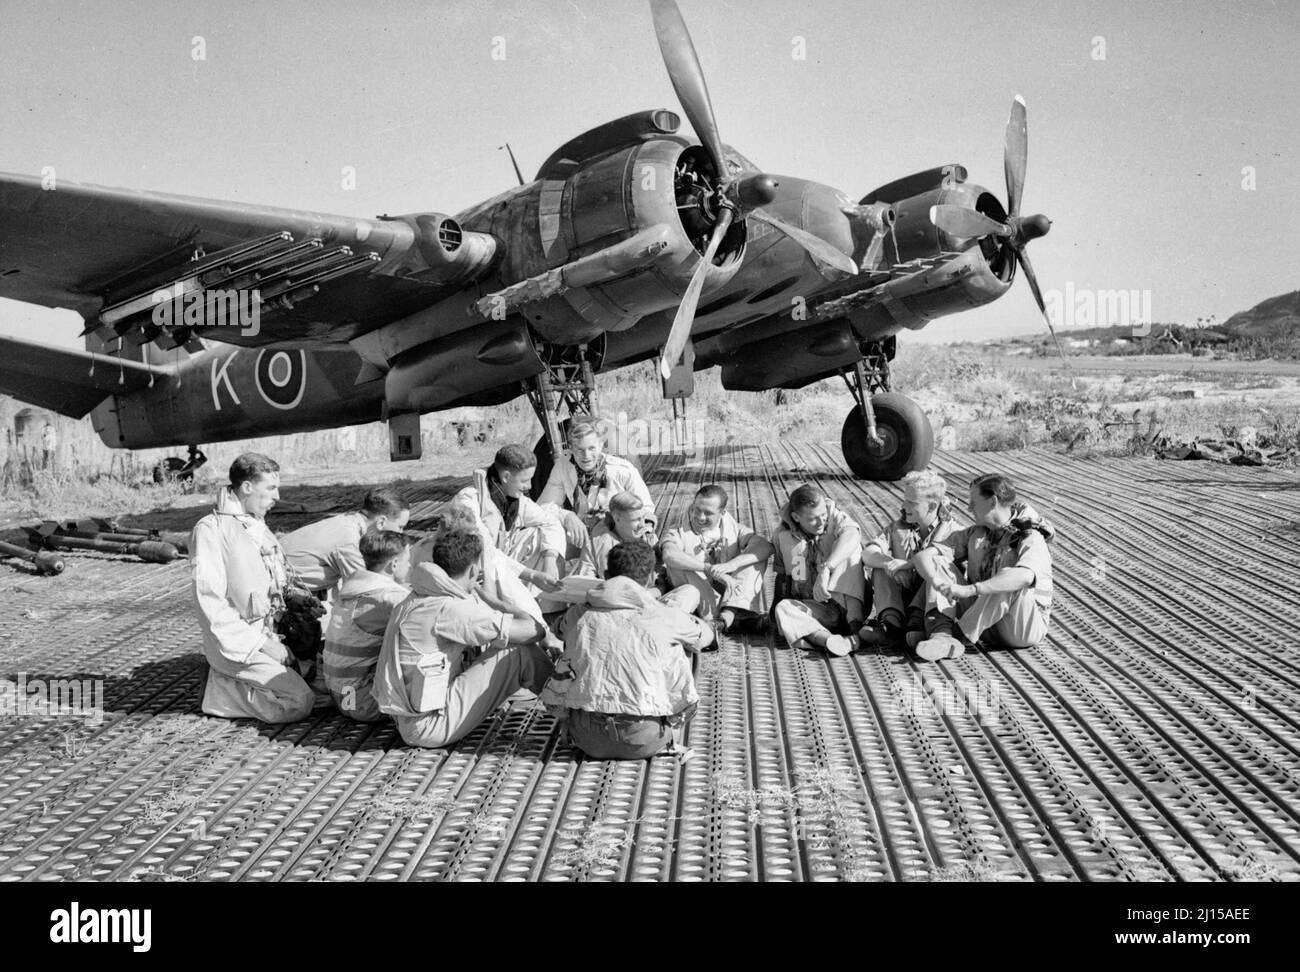 Aircrew of No. 16 Squadron SAAF and No. 227 Squadron RAF sitting in front of a Bristol Beaufighter at Biferno, Italy, prior to taking off to attack a German headquarters building in Dubrovnik, Yugoslavia, 14 August 1944. Aircrews of No. 16 Squadron SAAF and No. 227 Squadron RAF sitting in a dispersal at Biferno, Italy, prior to taking off to attack a German headquarters building in Dubrovnik, Yugoslavia. A Bristol Beaufighter Mark X, armed with rocket projectiles stands behind them Stock Photo